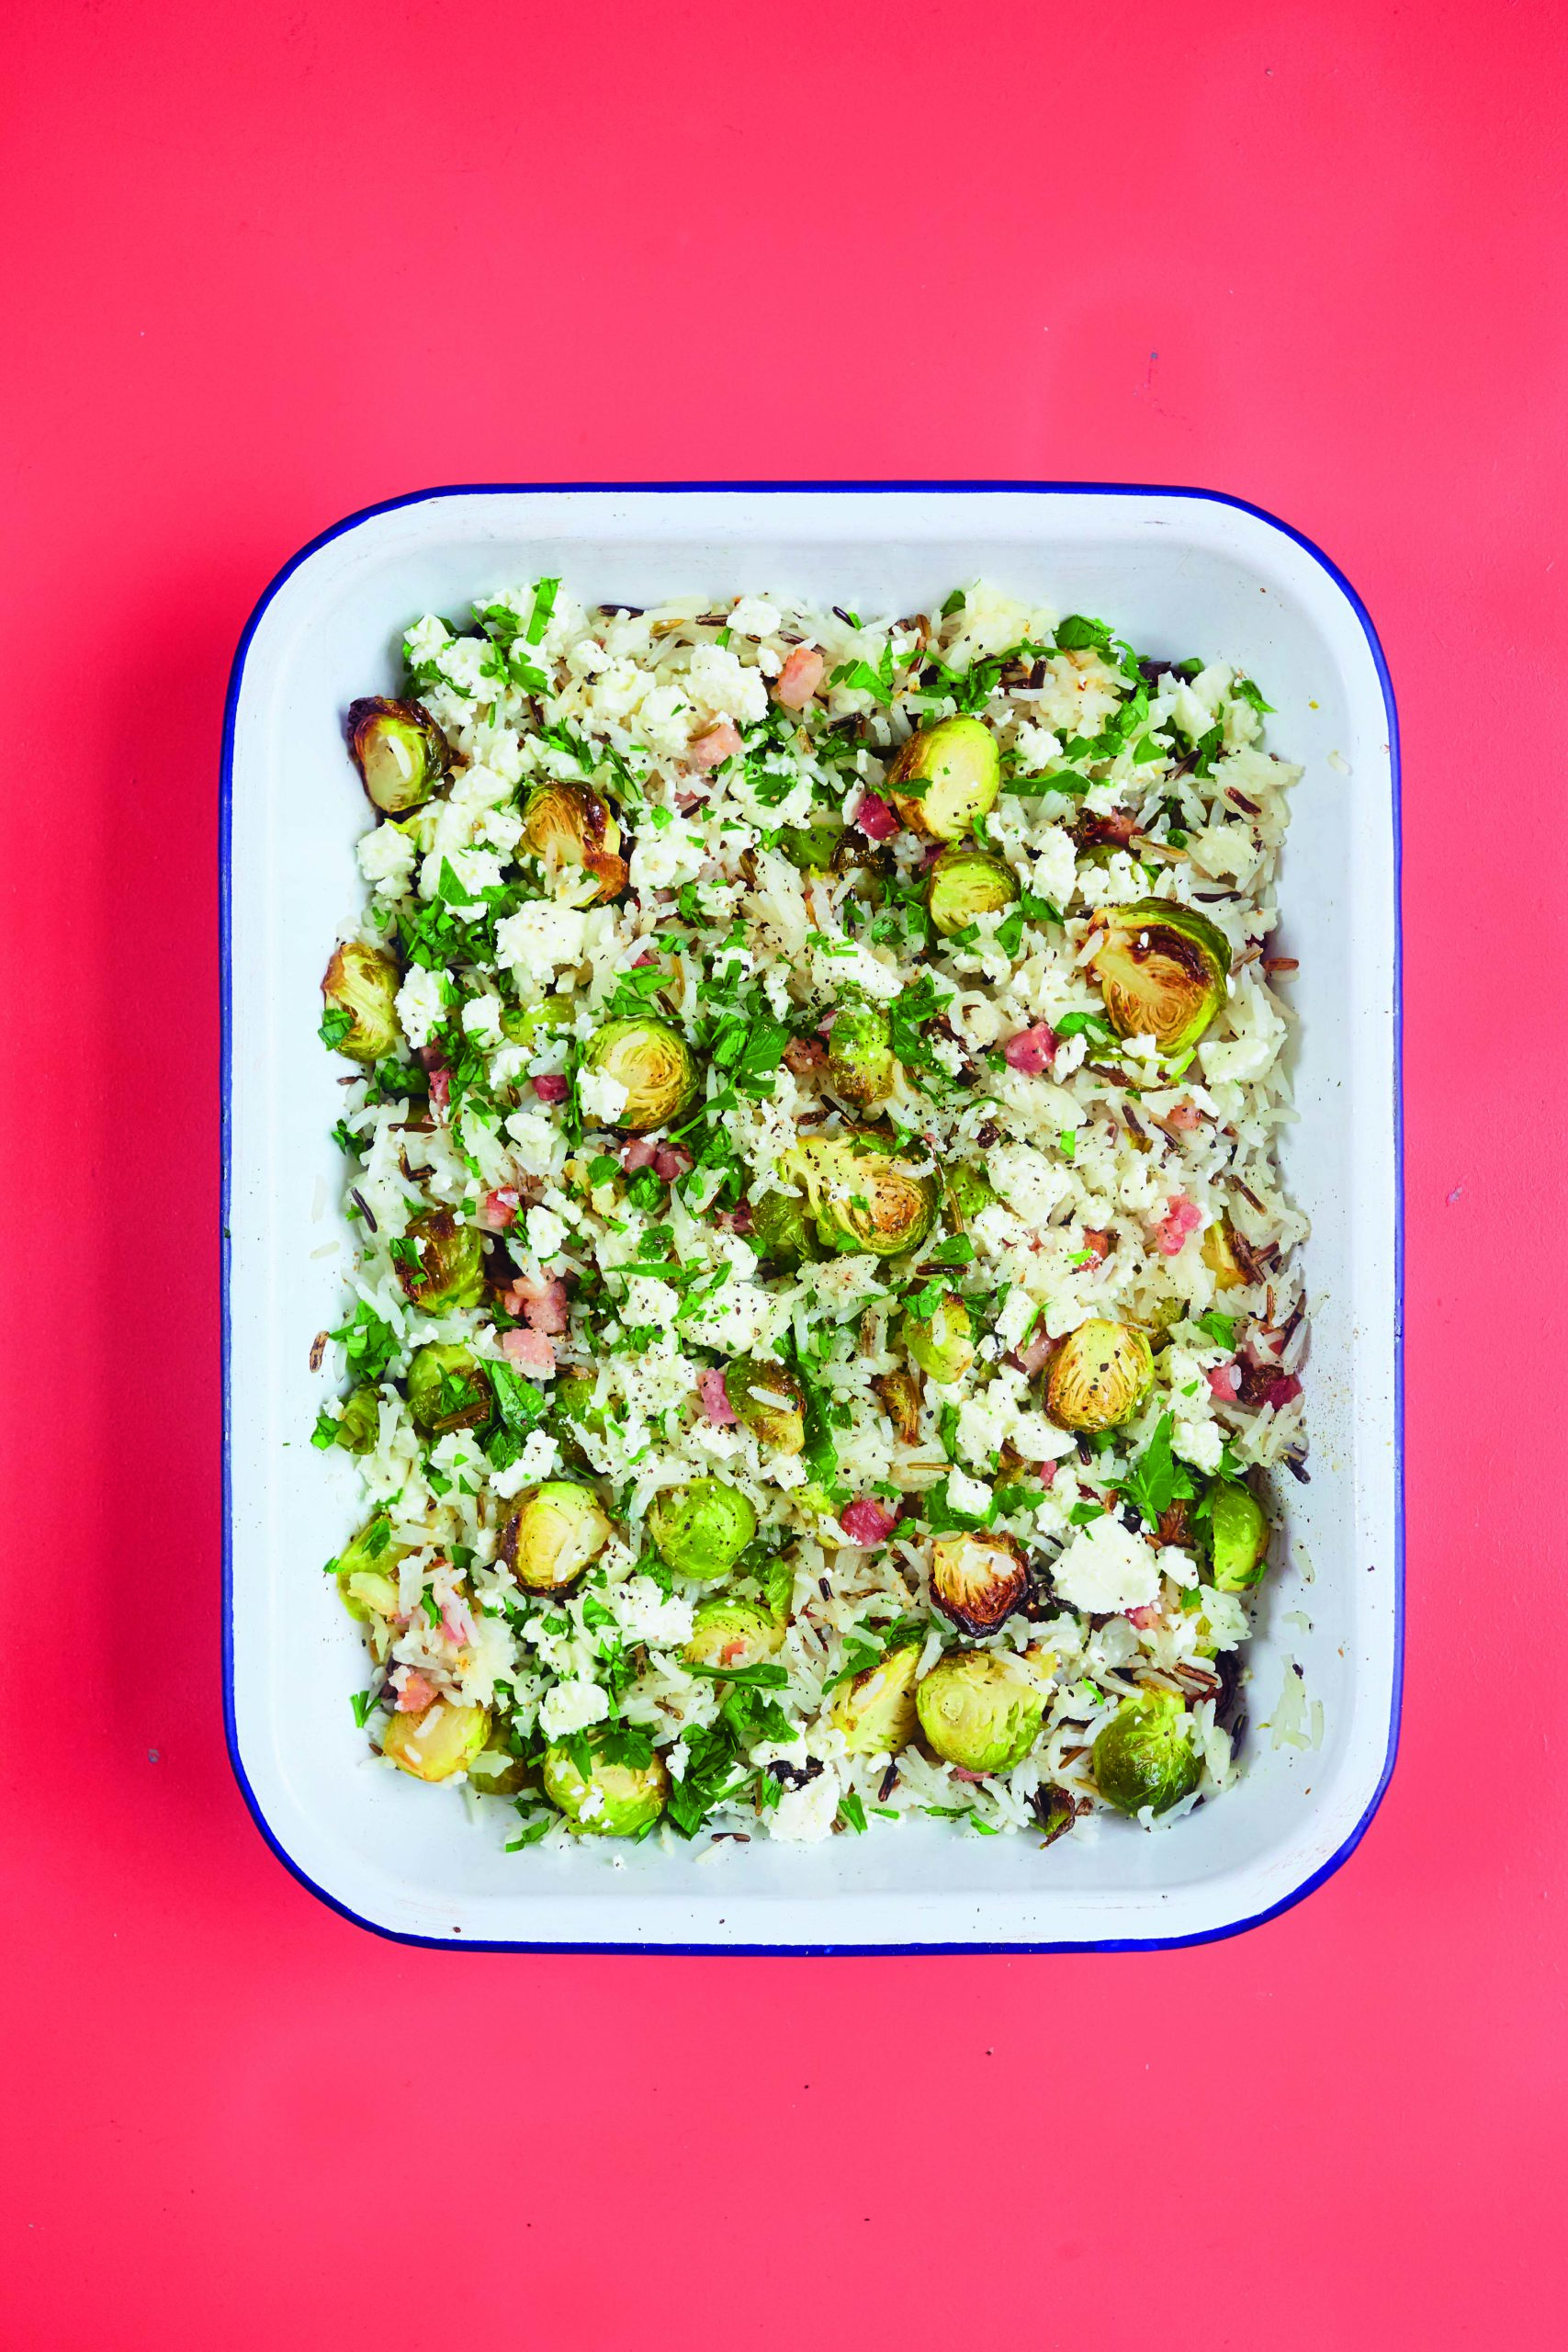 Wild Rice Winter Salad With Roasted Brussels Sprouts, Pancetta, Feta and Sunflower Seeds